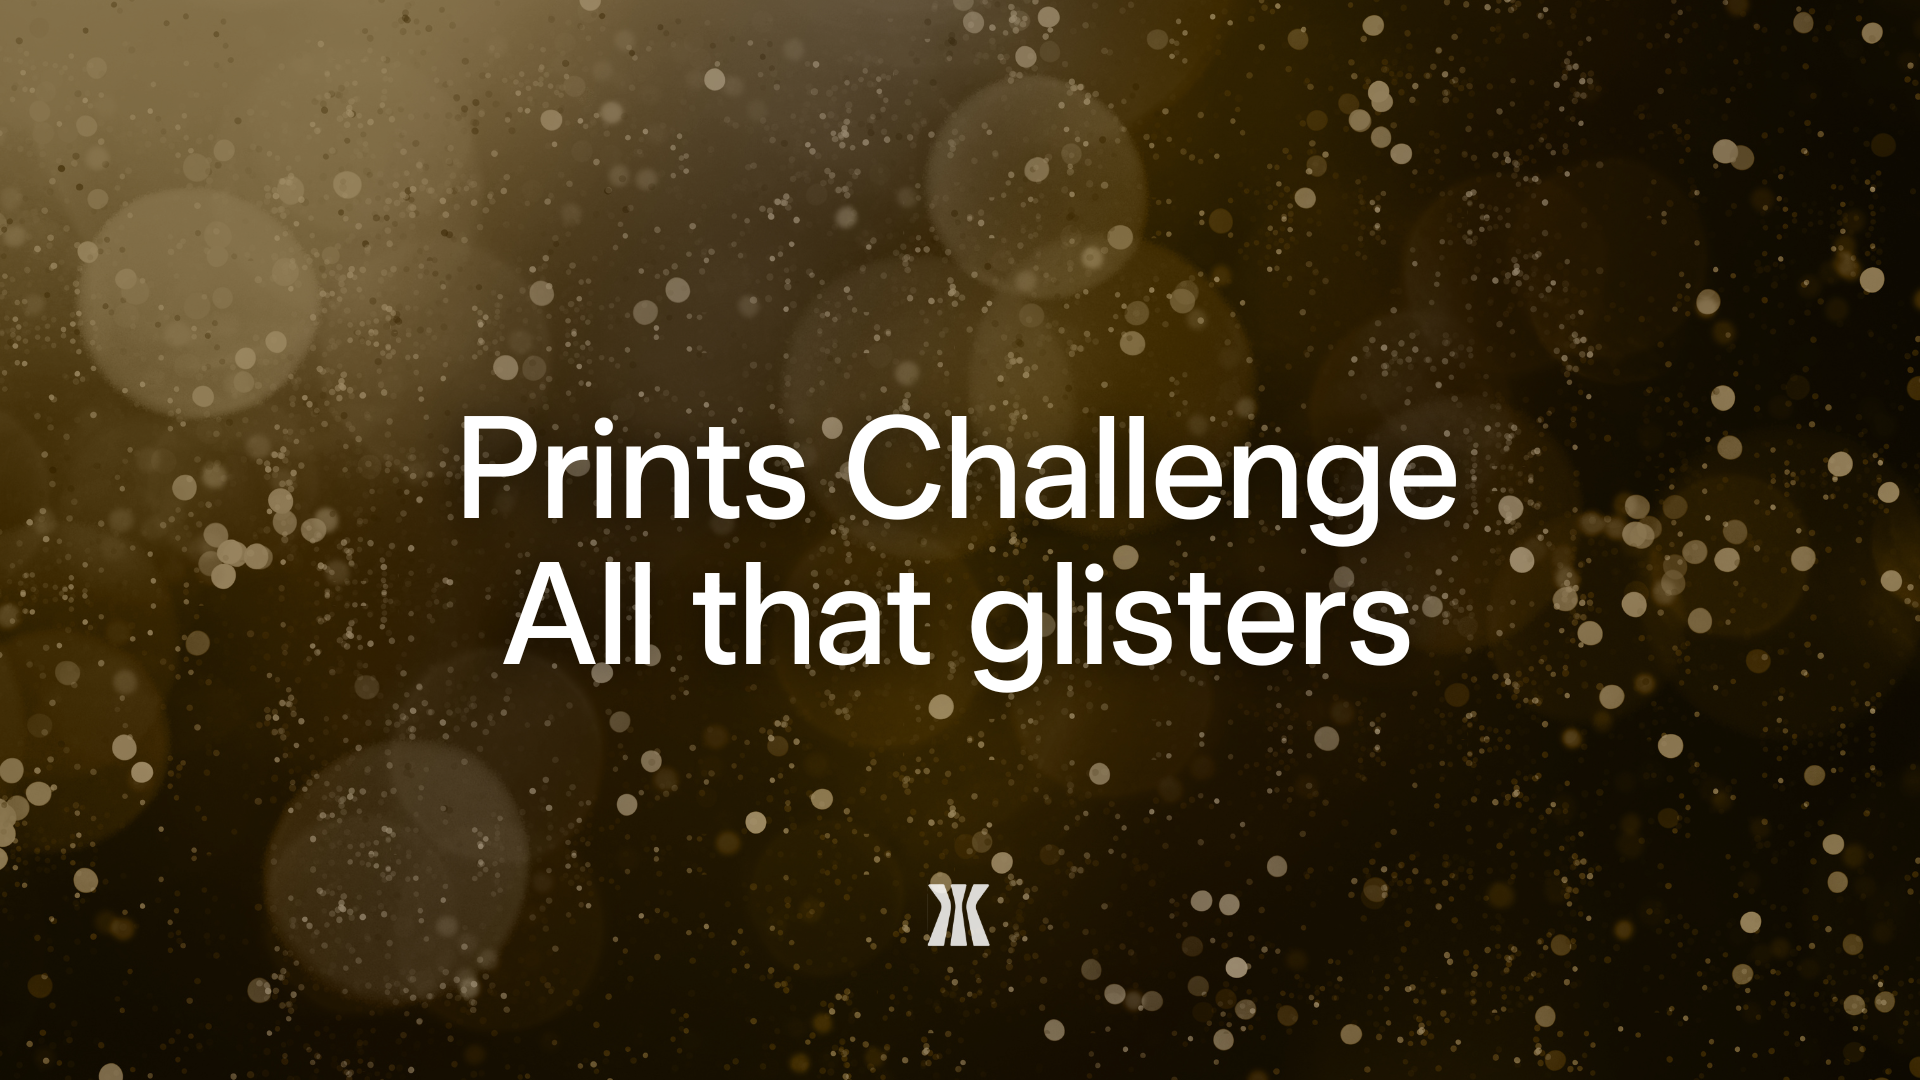 Prints Challenge: All that glitters is not gold